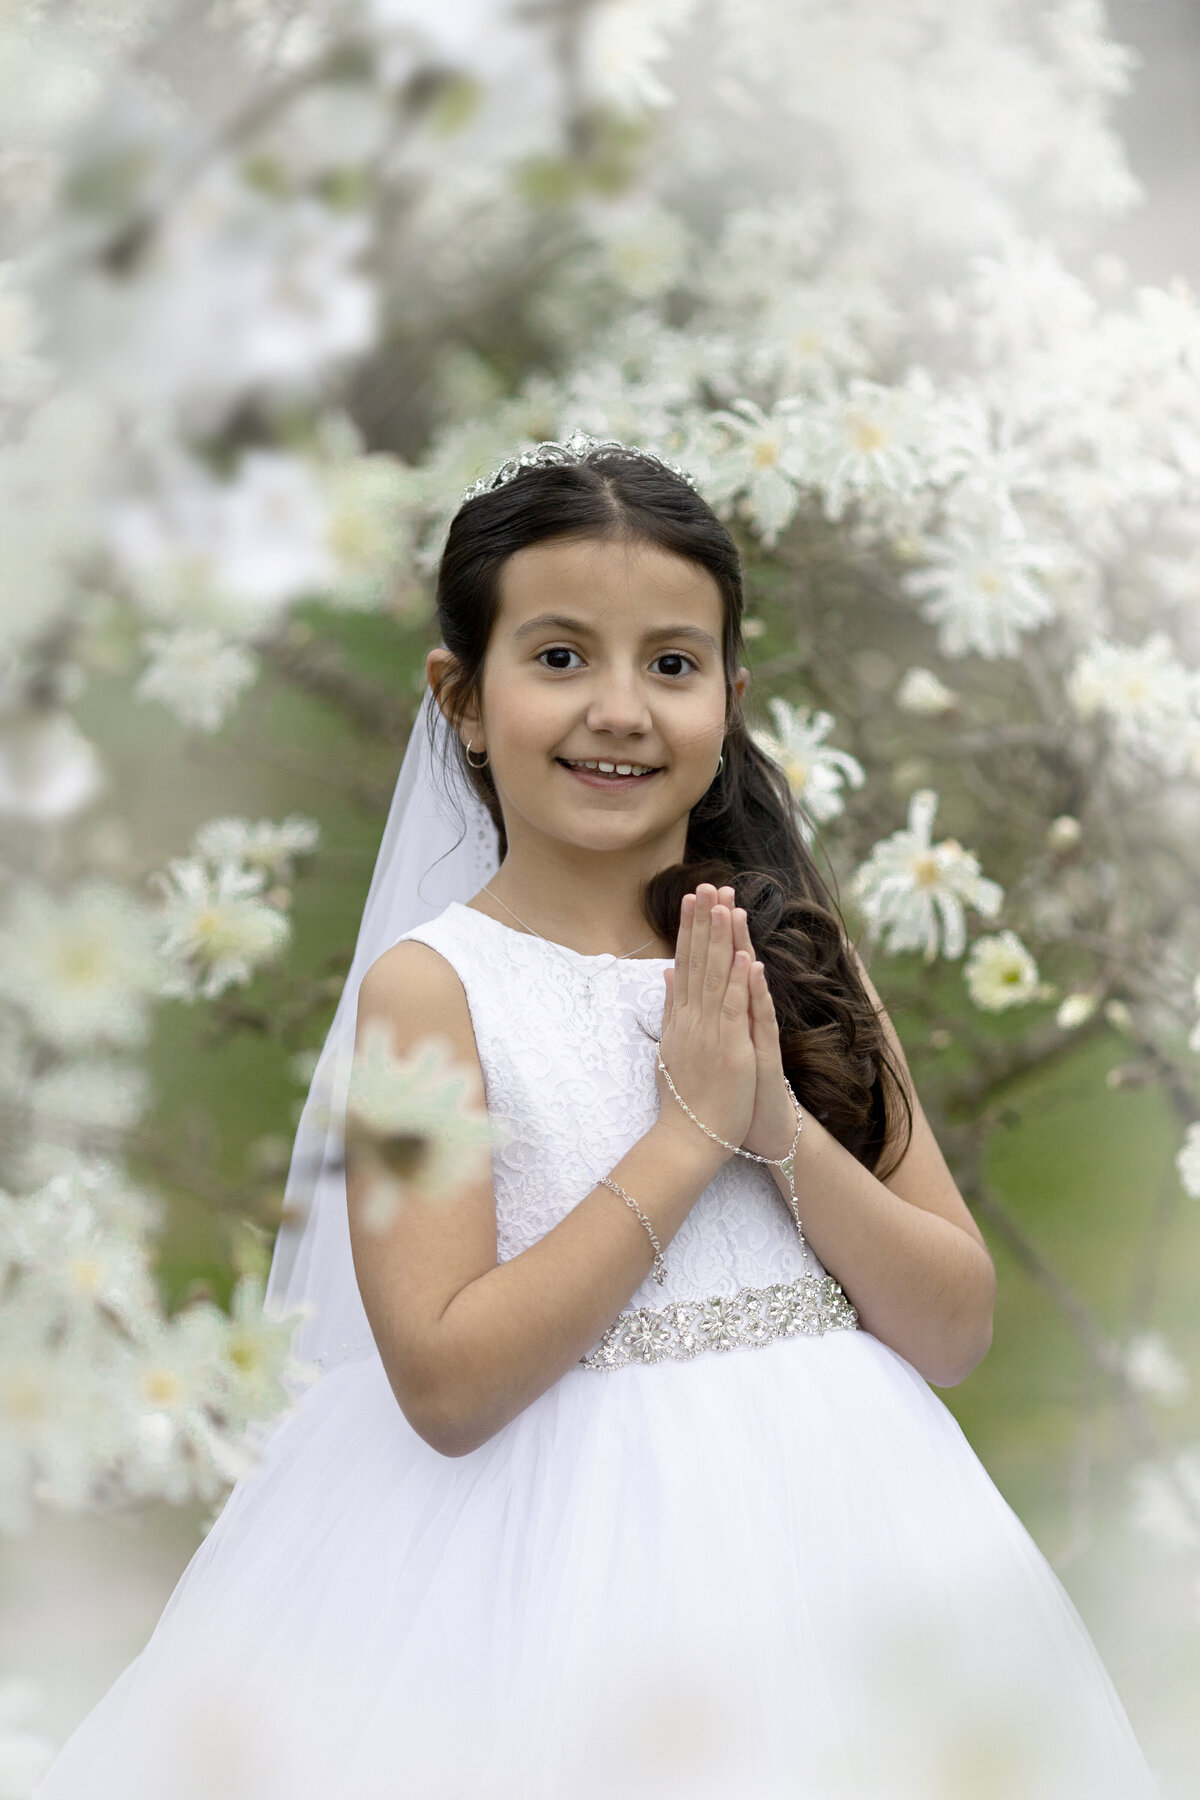 A young girl prays while standing in a white communion dress under a white blooming tree